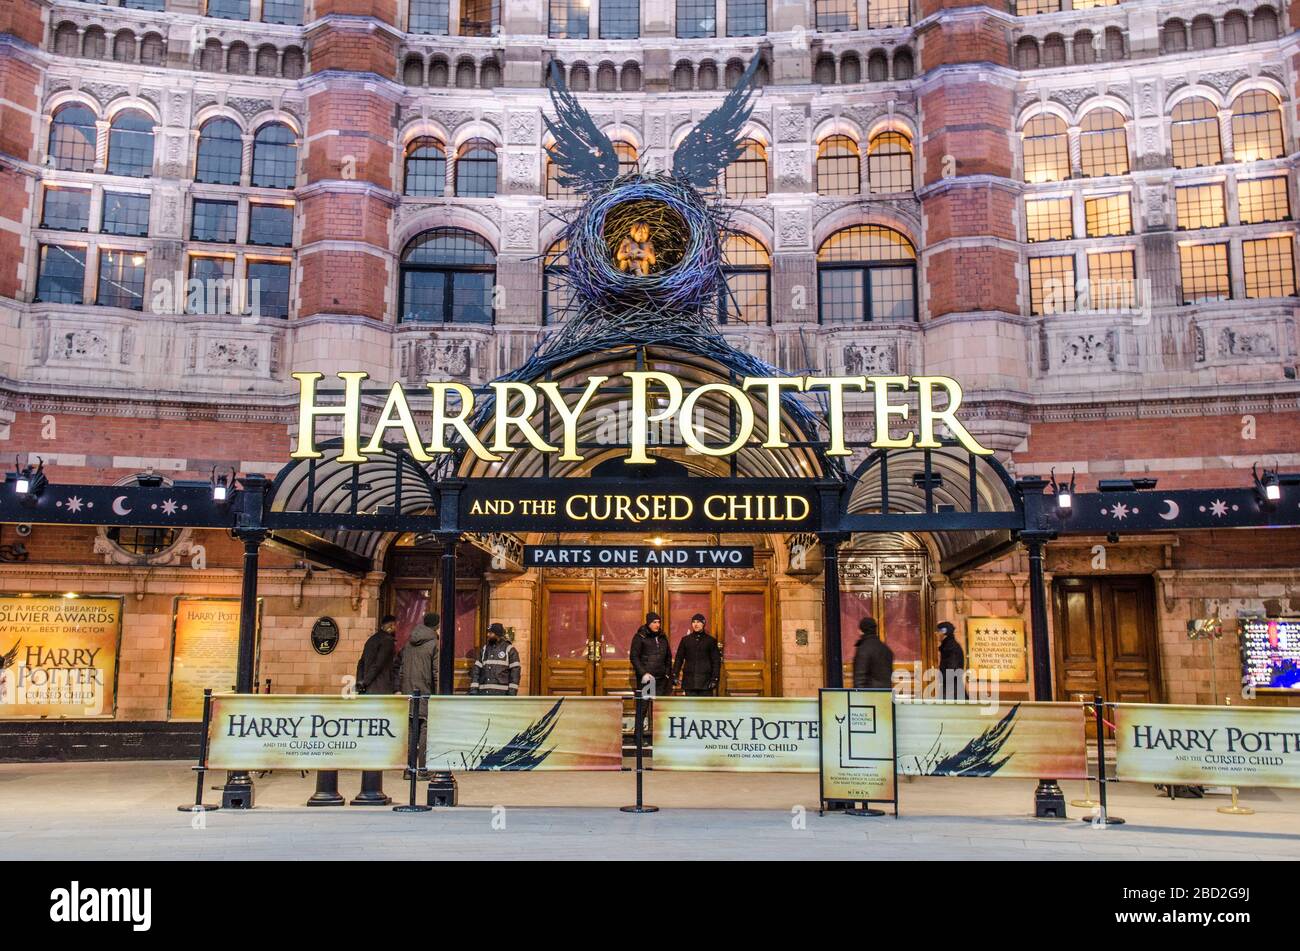 LONDON- Palace Theatre in London's West End showing Harry Potter and the Cursed Child Stock Photo